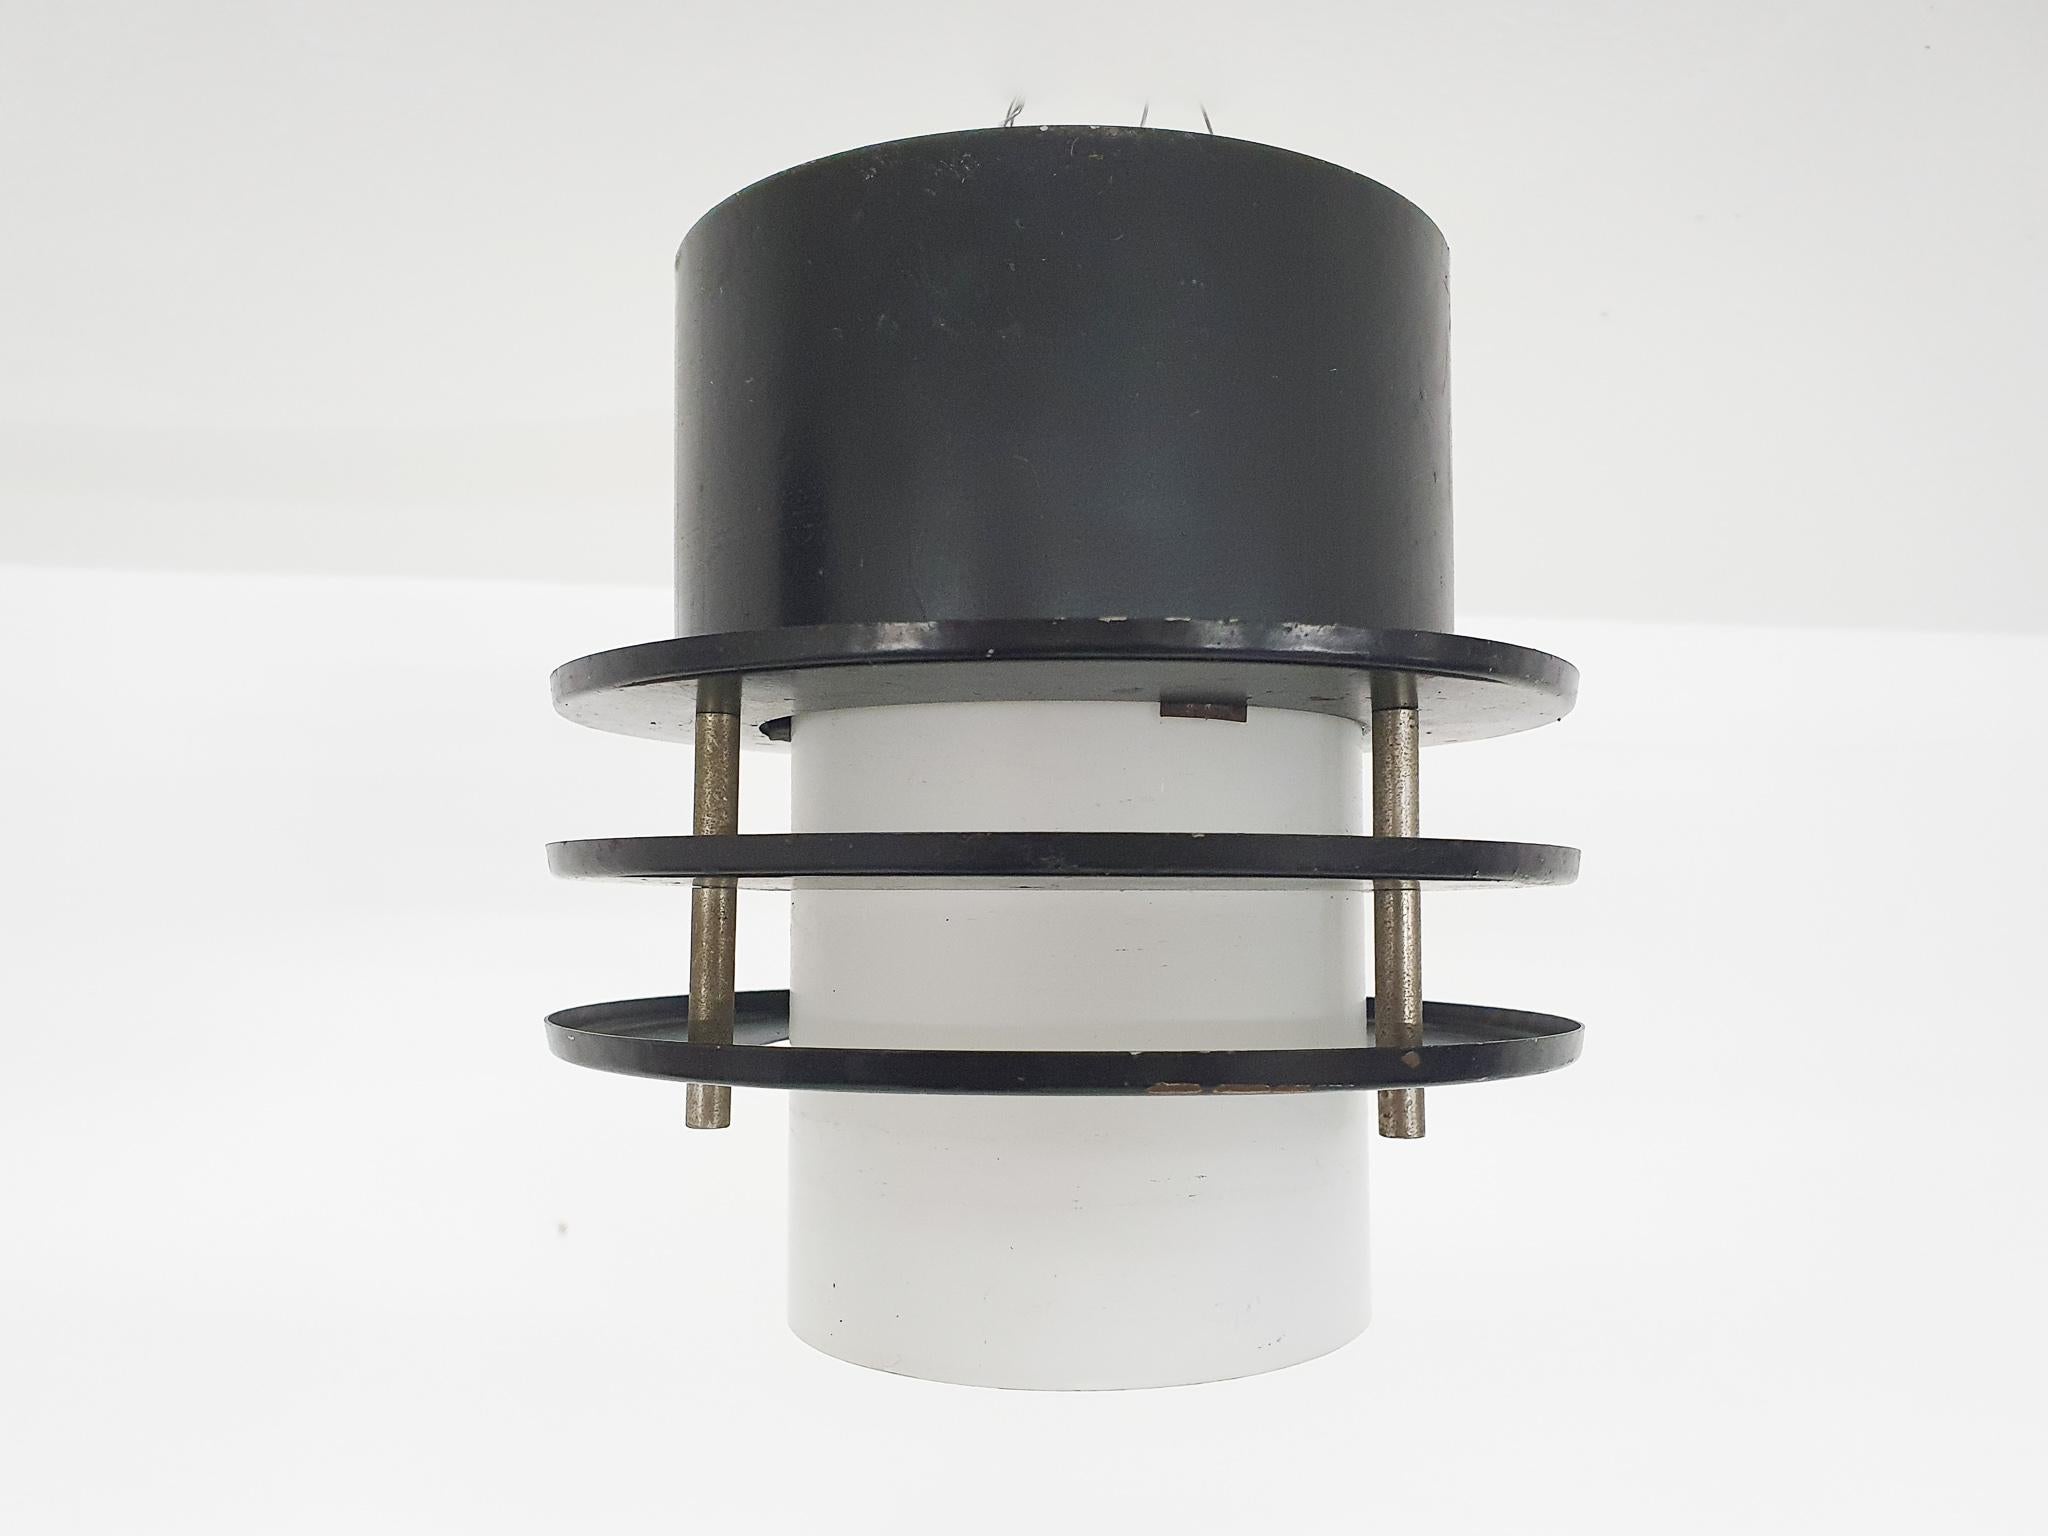 Dutch Set of Two Minimalistic Ceiling Lights in Glass and Metal, the Netherlands '60s For Sale